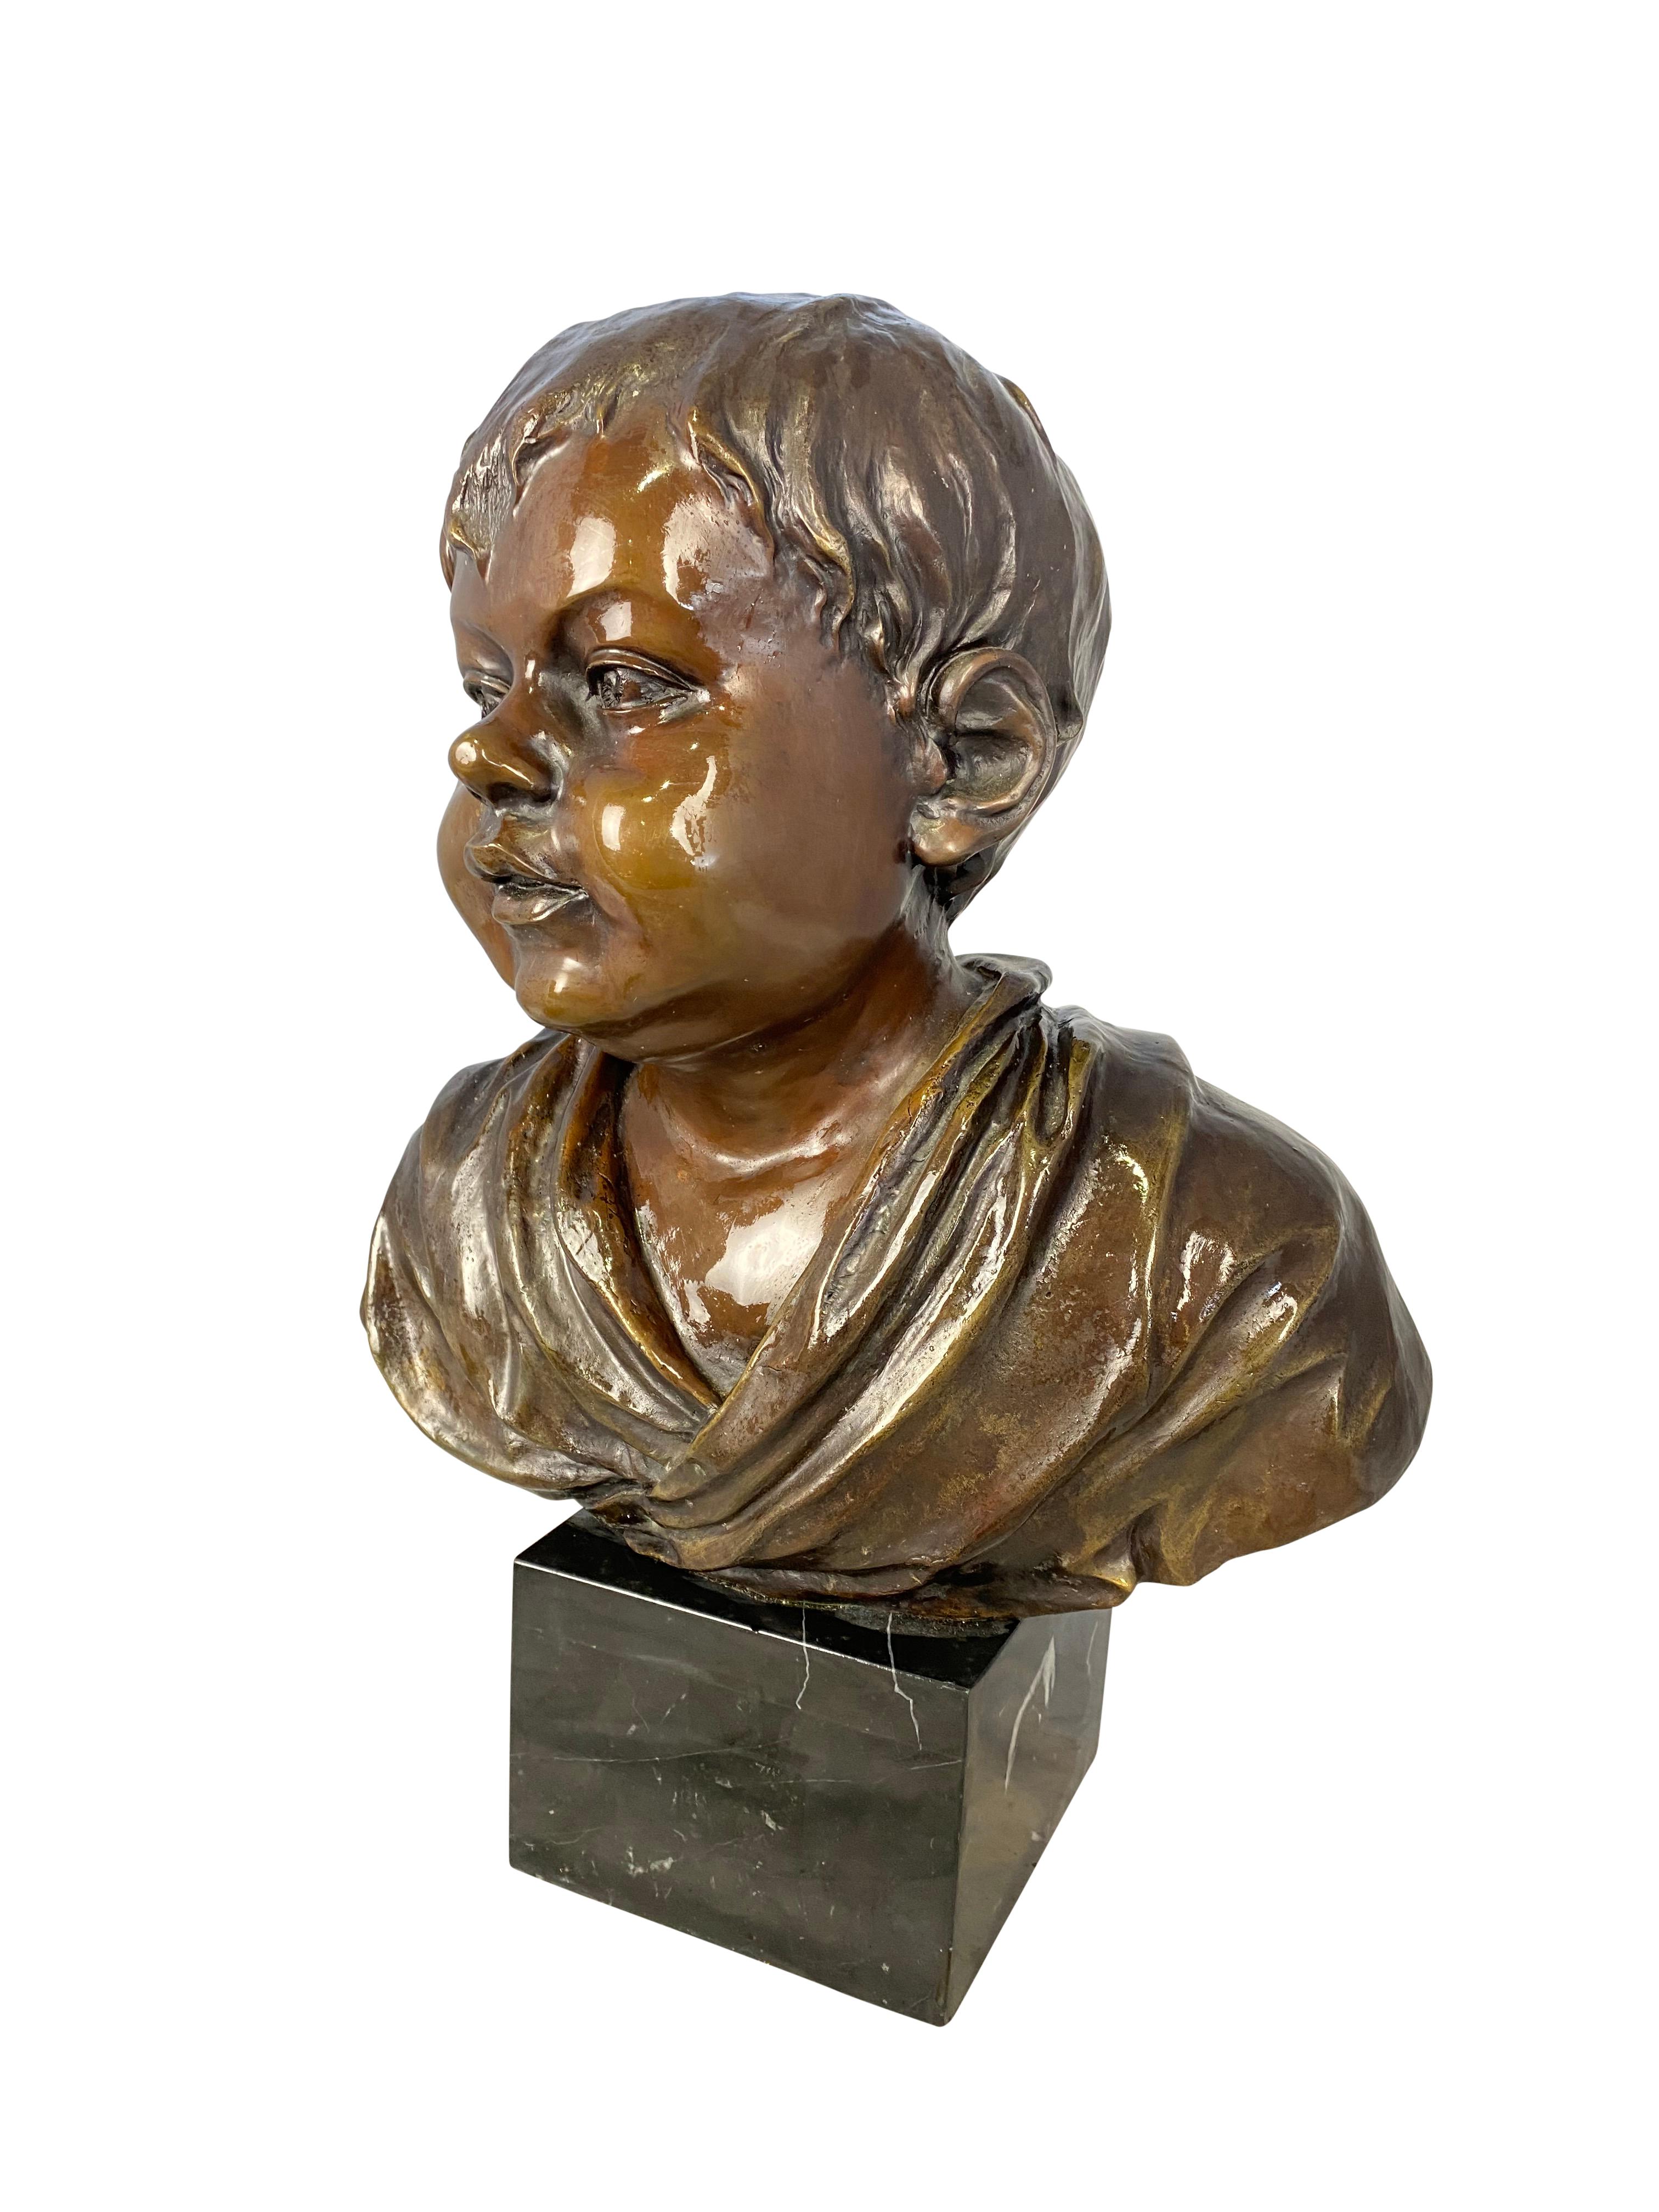 A fine detailed bronze, 20th century bust of a child, signed by O'Brian. This bronze has a beautiful patina, attached to a solid marble base. This piece is absolutely charming.

Dimensions: (cm)
47 H/32 W/32 D.